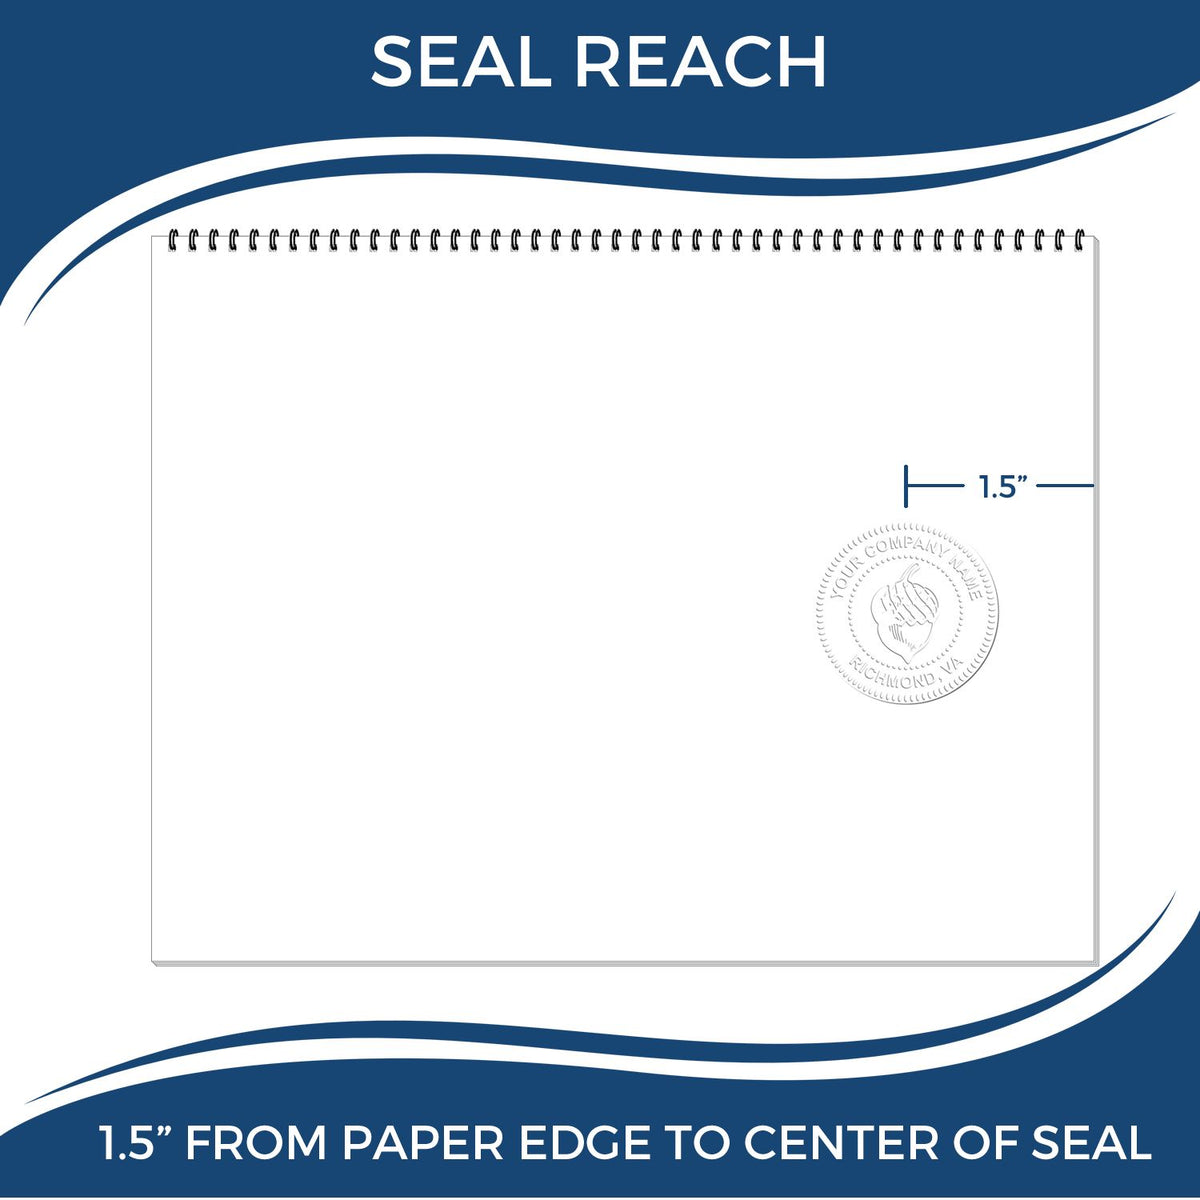 An infographic showing the seal reach which is represented by a ruler and a miniature seal image of the Gift Idaho Engineer Seal